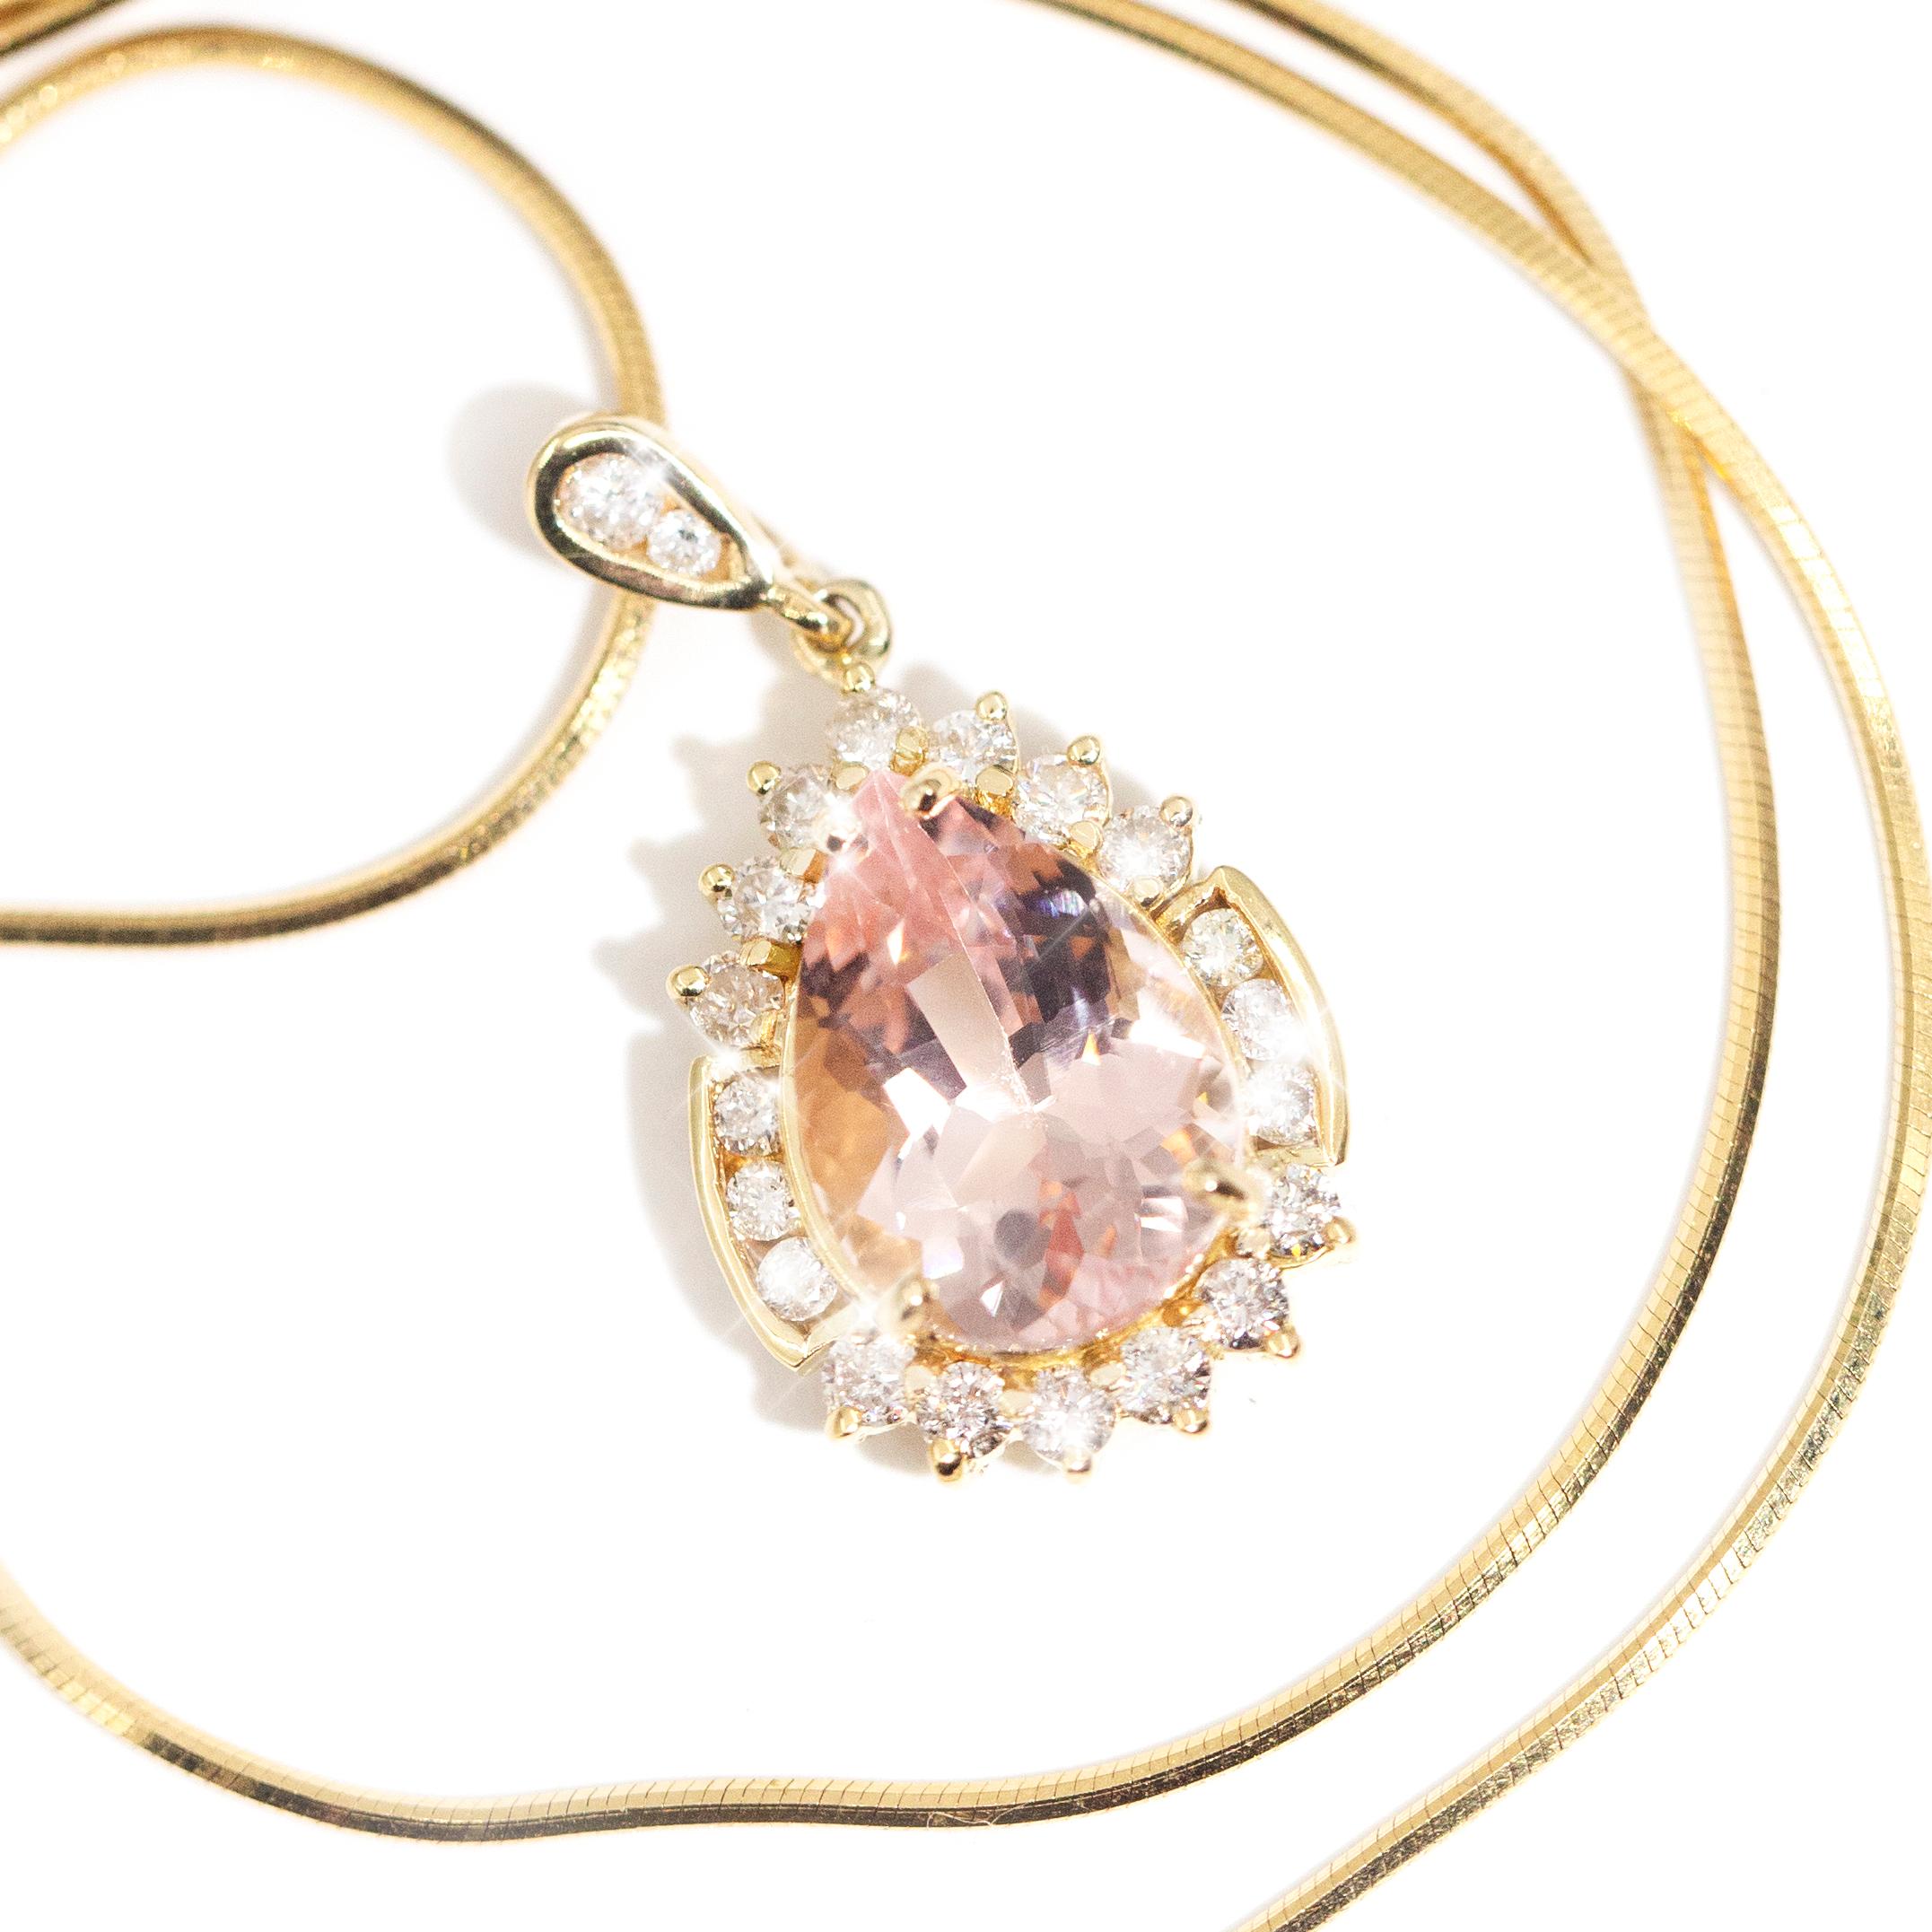 Forged in 18 carat yellow gold, this gorgeous vintage pendant features an enchanting 4.65 carat light pink drop shape morganite encompassed by shining round brilliant diamonds. Further, the bail is embellished with two sparkling round brilliant cut